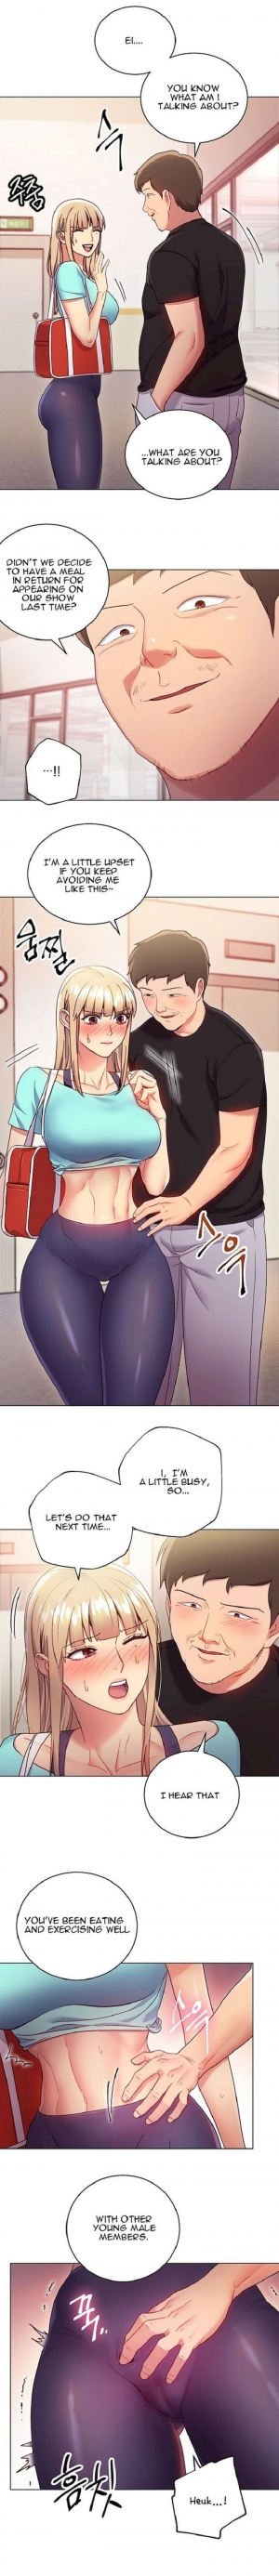 [Neck Pilllow] Stepmother Friends Ch.20/? [English] [Hentai Universe] - Page 151